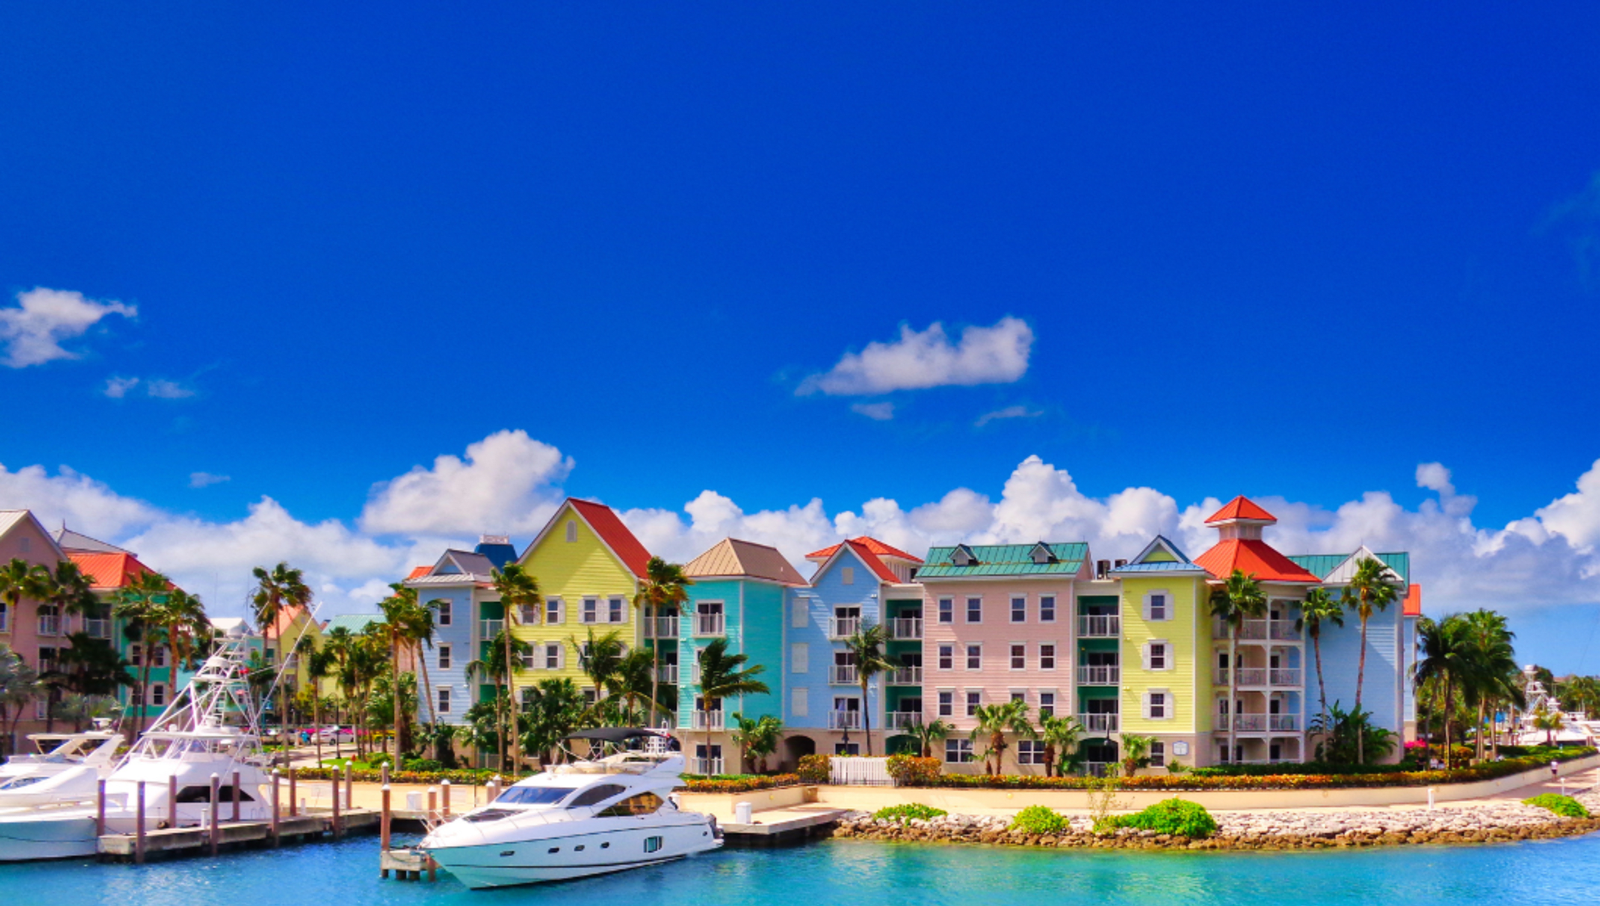 Colourful houses and boats along the water in Nassau Bahamas